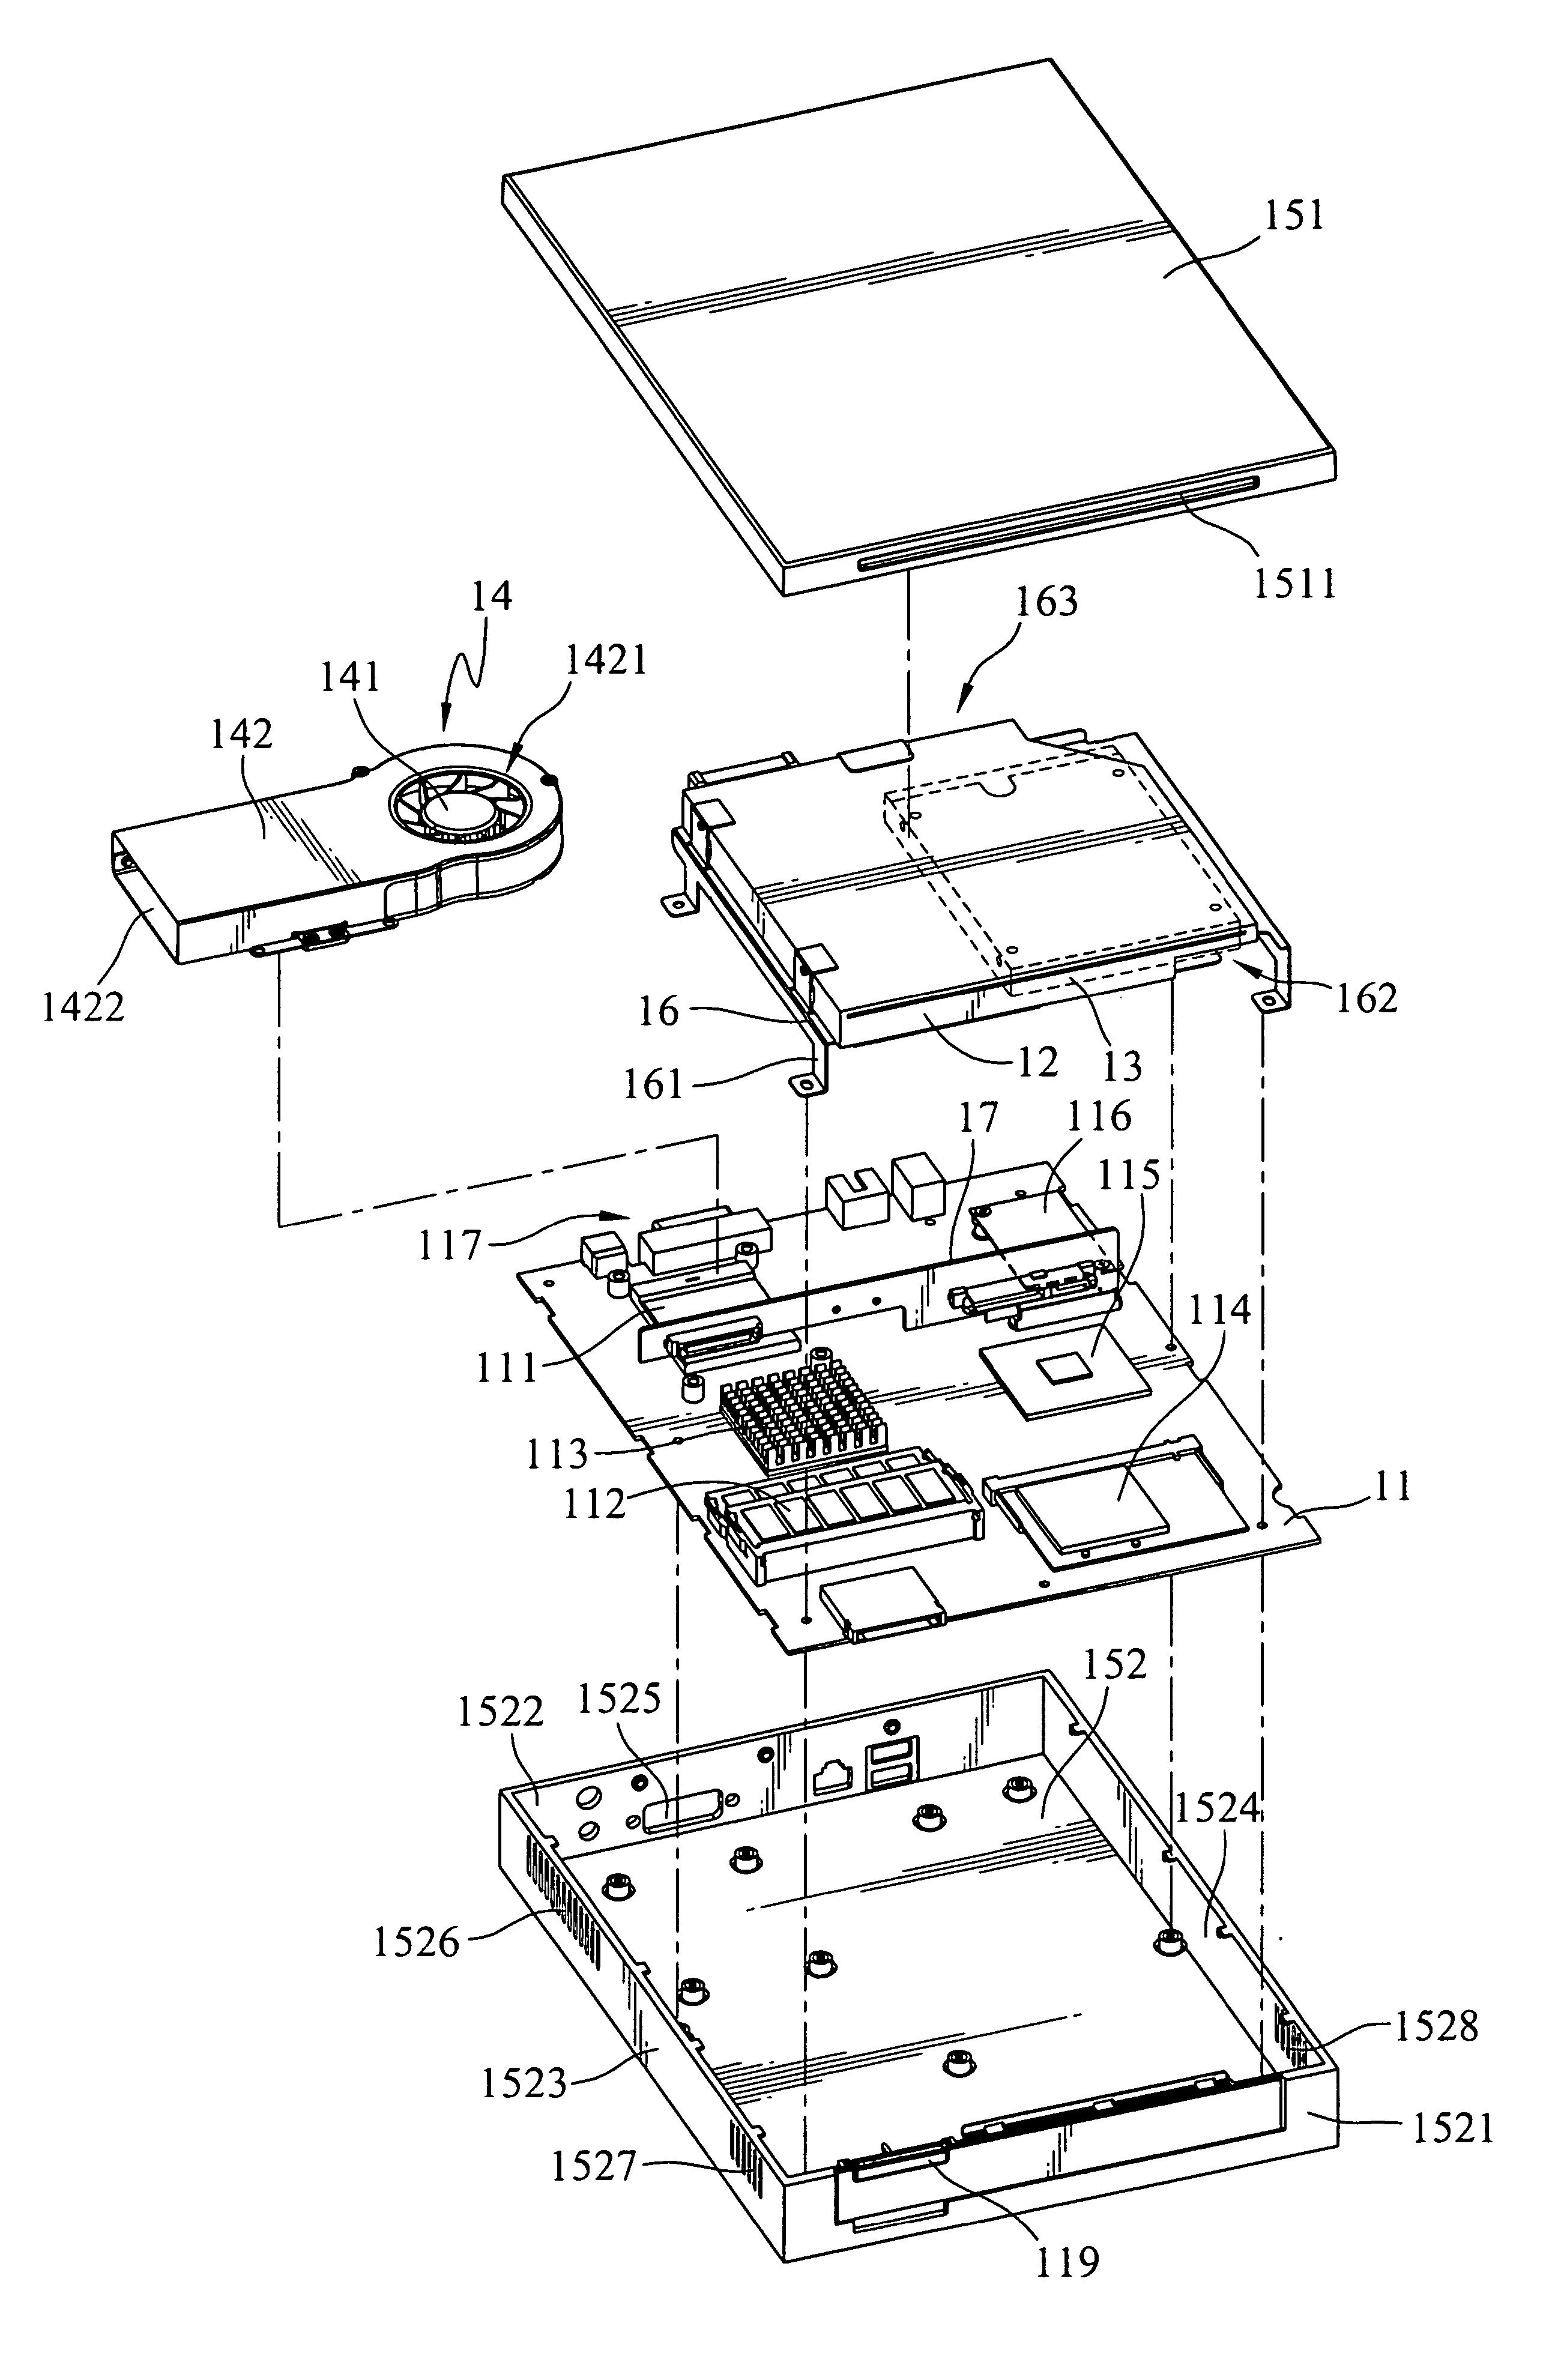 Method of determining minimal dimension of computer and computer designed though the method